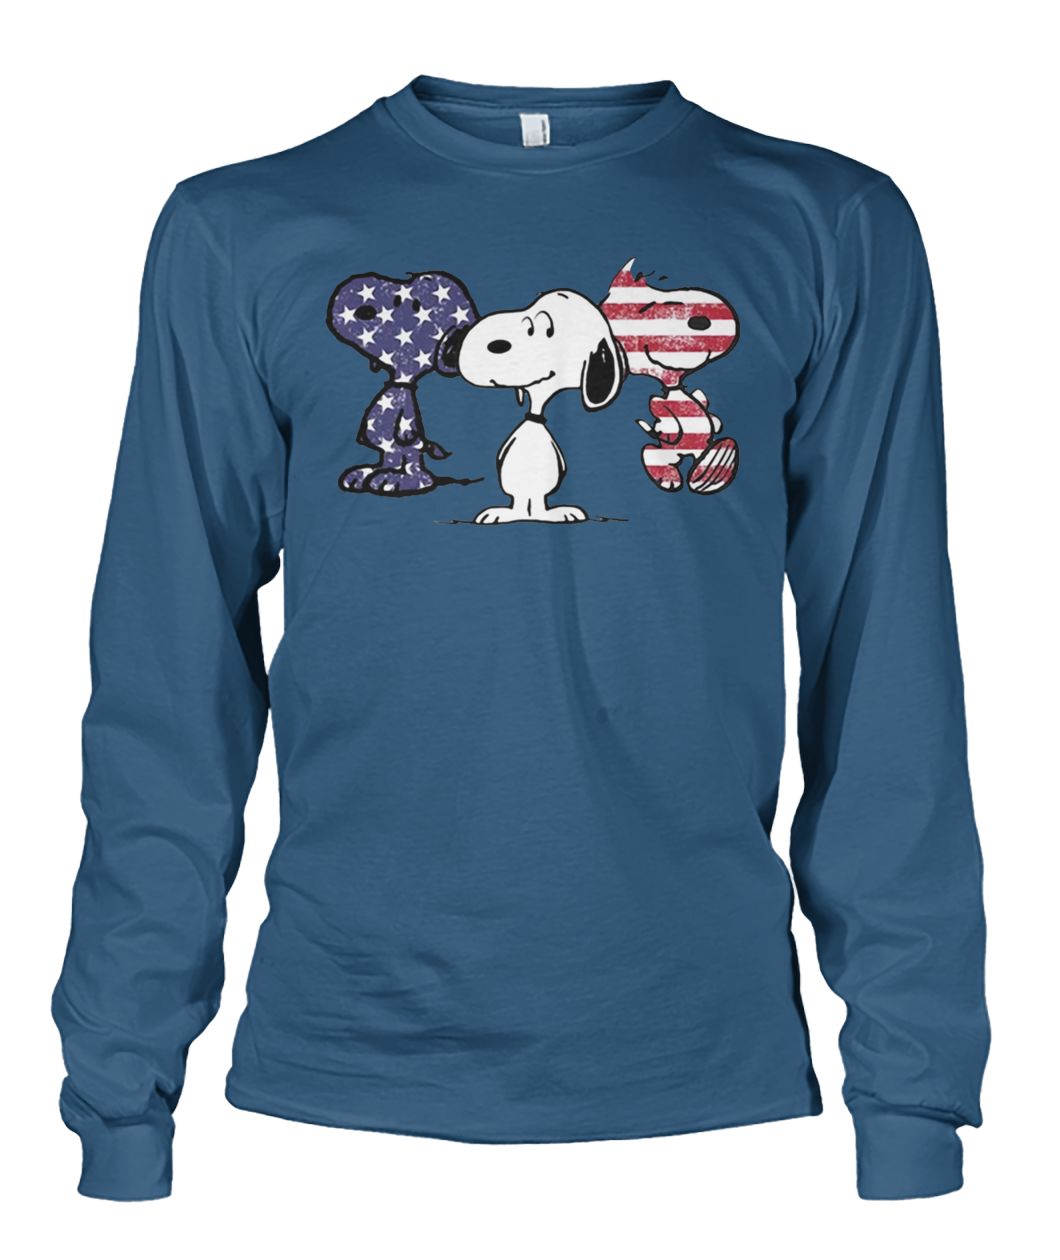 Snoopy america flag 4th of july unisex long sleeve